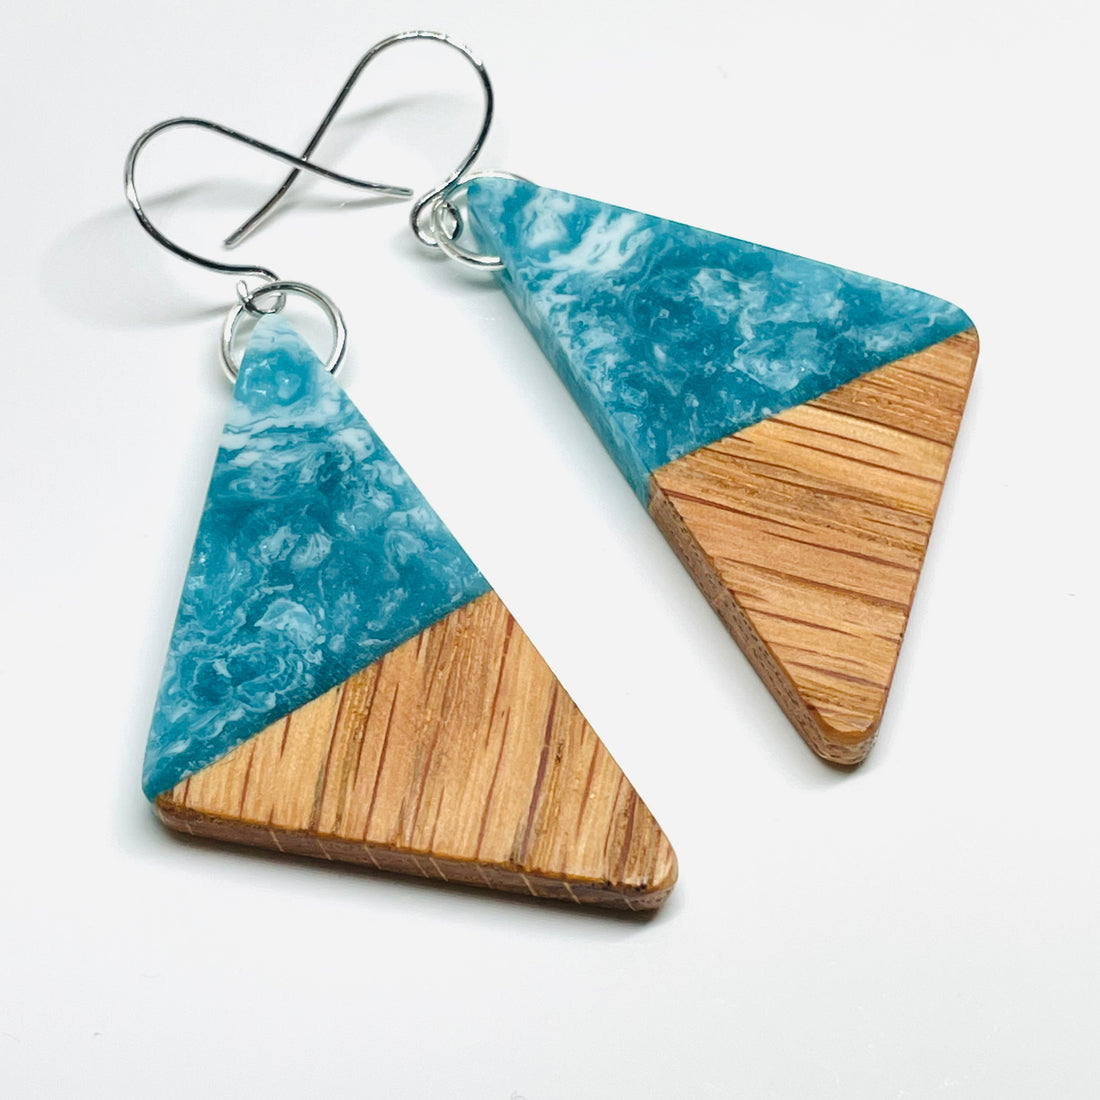 handmade jewelry, Minnesota local wood and resin artist. Ocean waves blue and green resin with white oak wood, nickel free dangle earrings triangle shaped